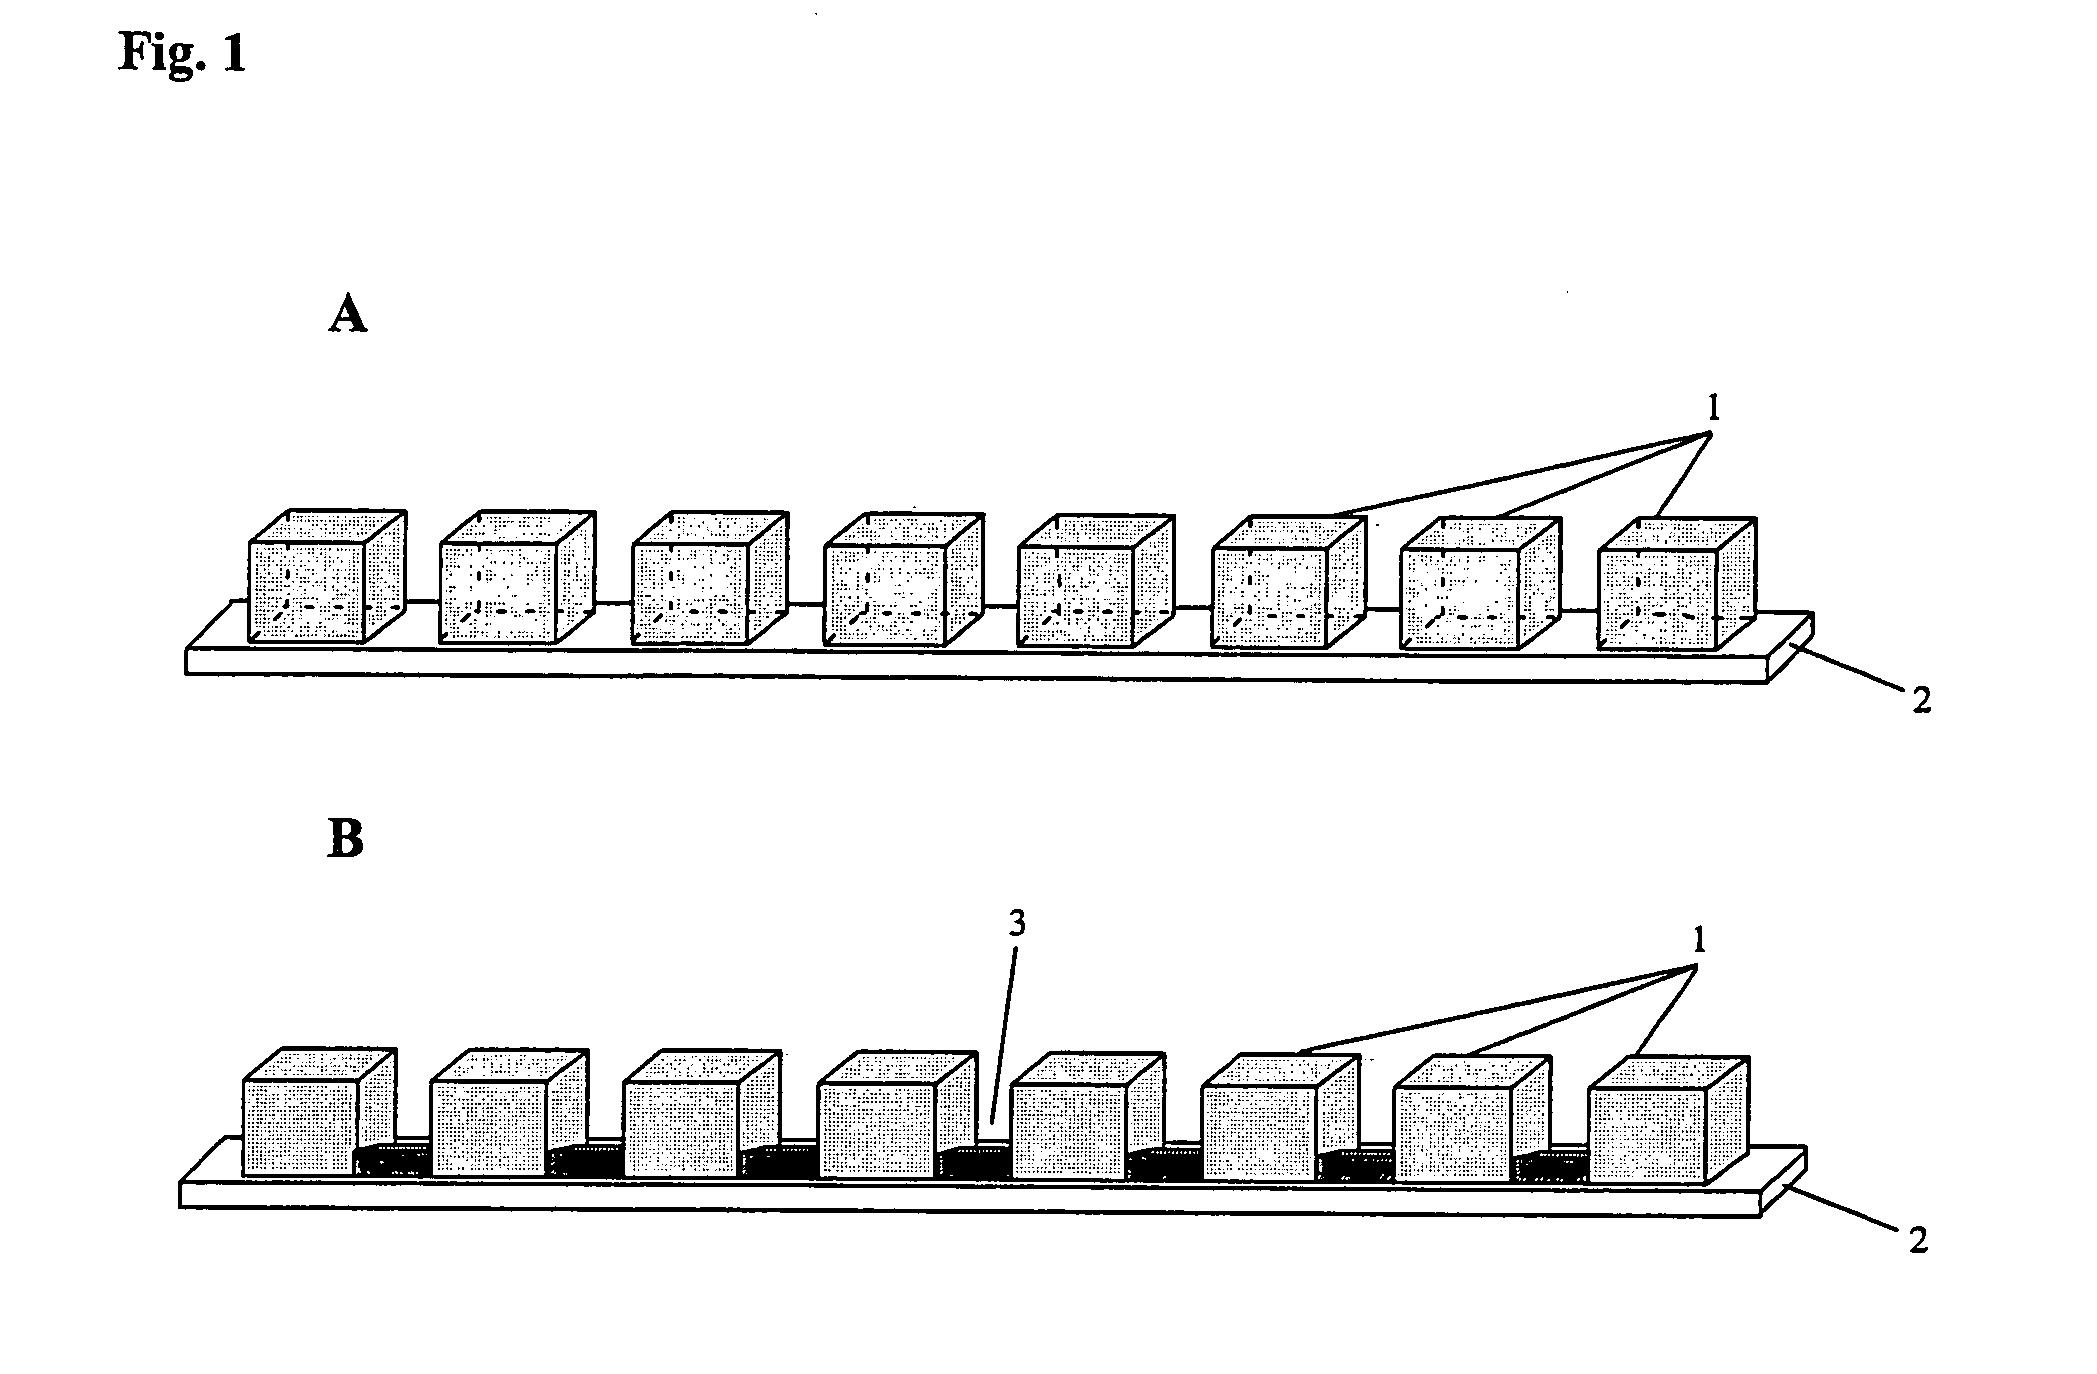 Apparatus and method for separating an analyte